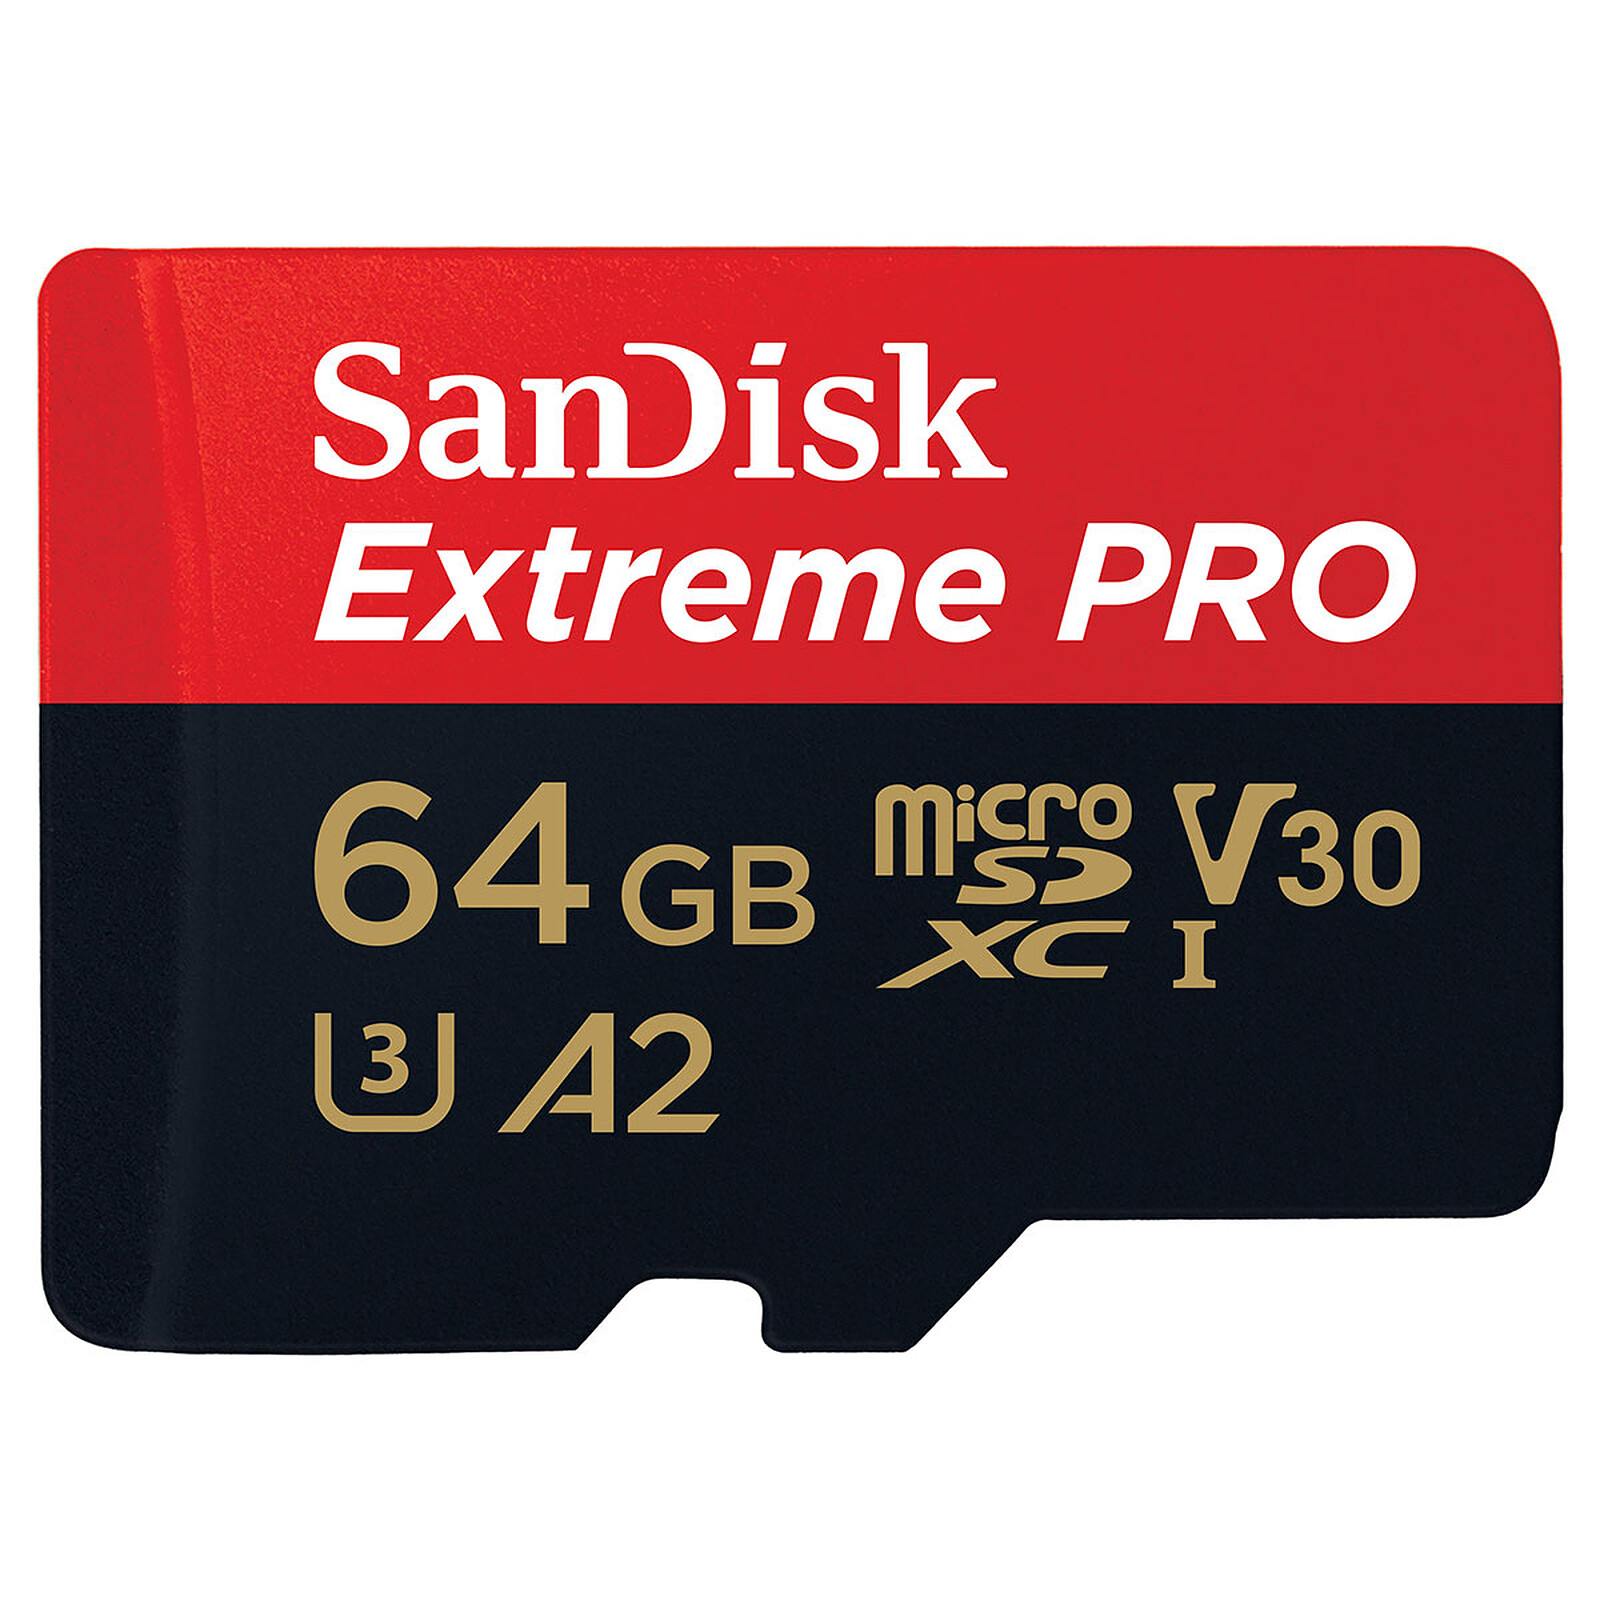 SanDisk Extreme Pro CompactFlash 32GB Memory Card - Memory card - LDLC  3-year warranty